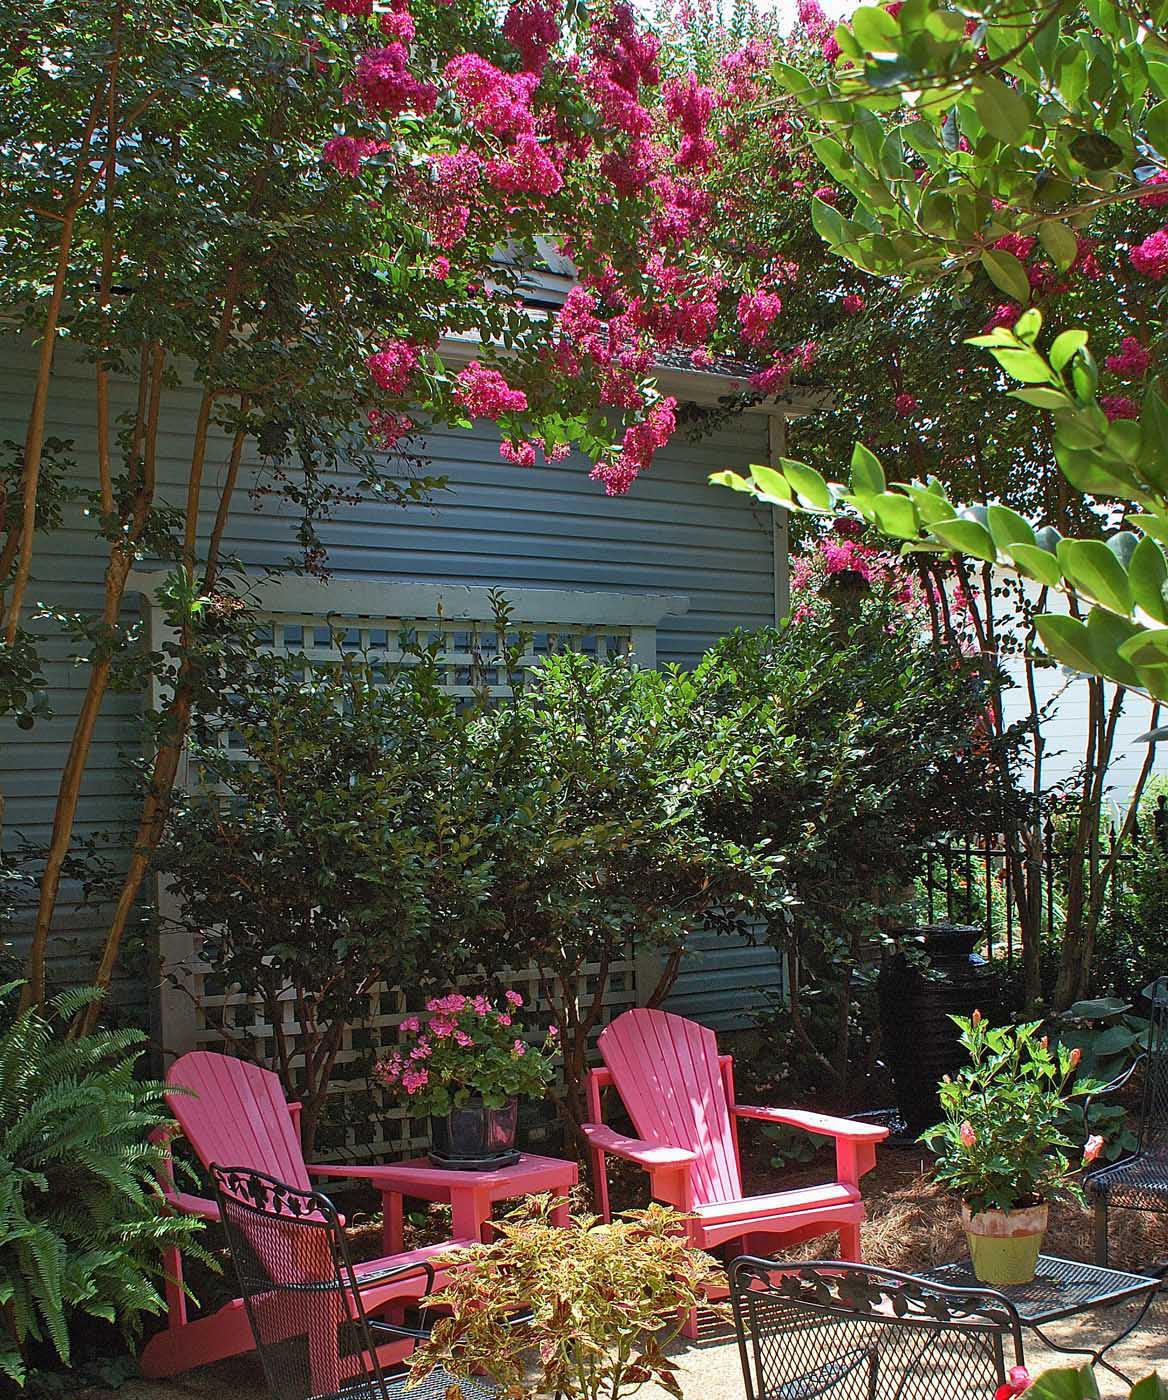 The Adirondack chair is a style of furniture that has stood the test of time and reached heirloom status. These hot pink chairs and matching table are flanked by tall crape myrtles of a similar color.